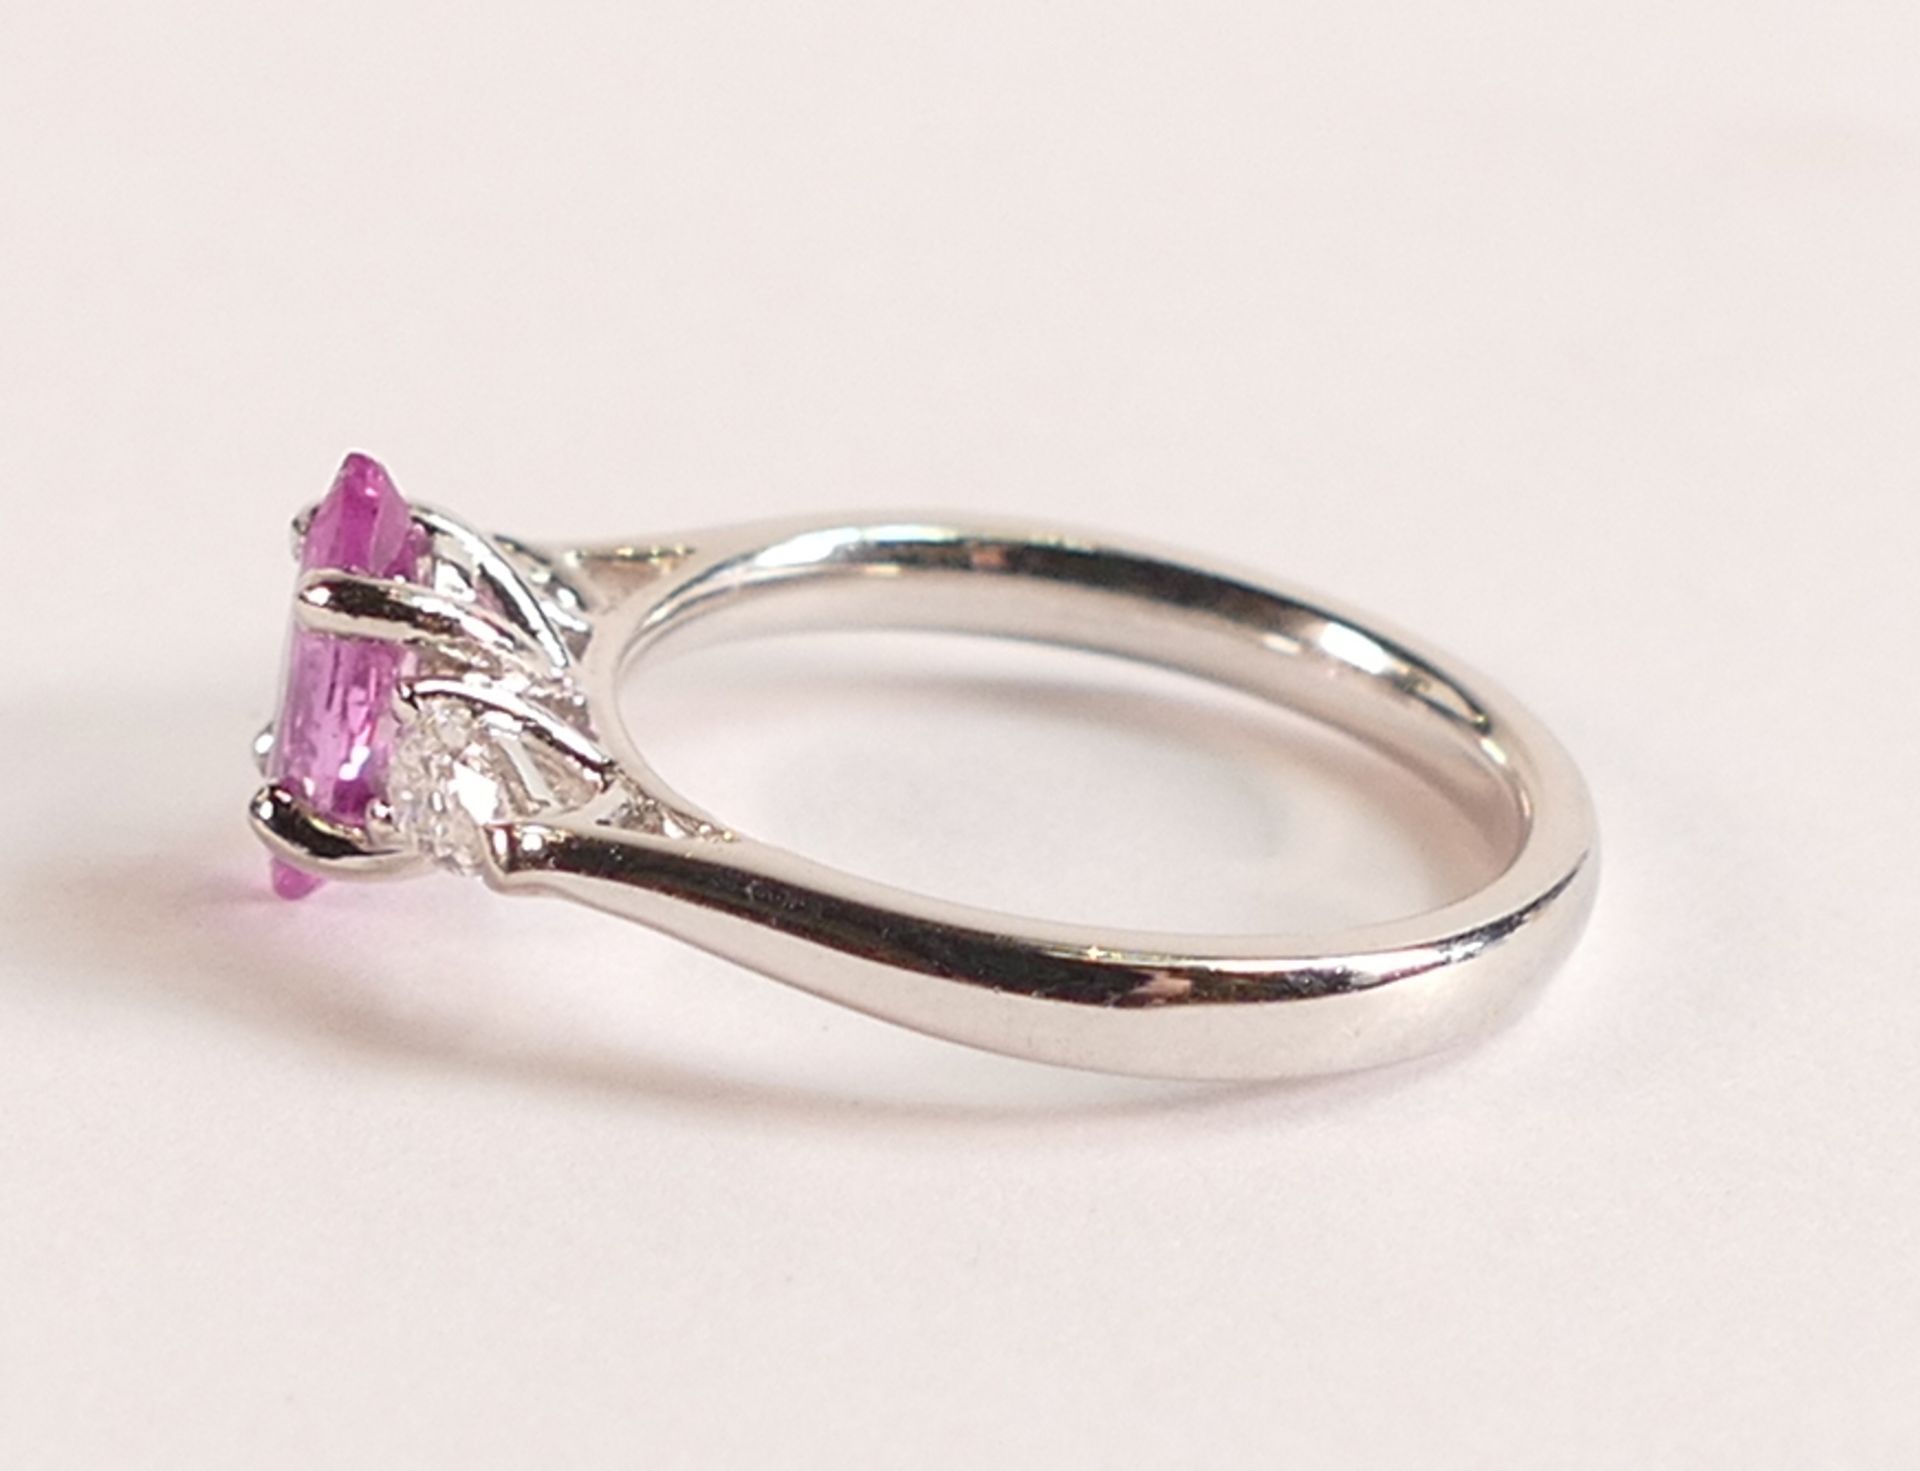 GIA certified Pink Sapphire 1.47ct and Diamond Ring in 950 Platinum - The beautiful marquee cut - Image 2 of 3